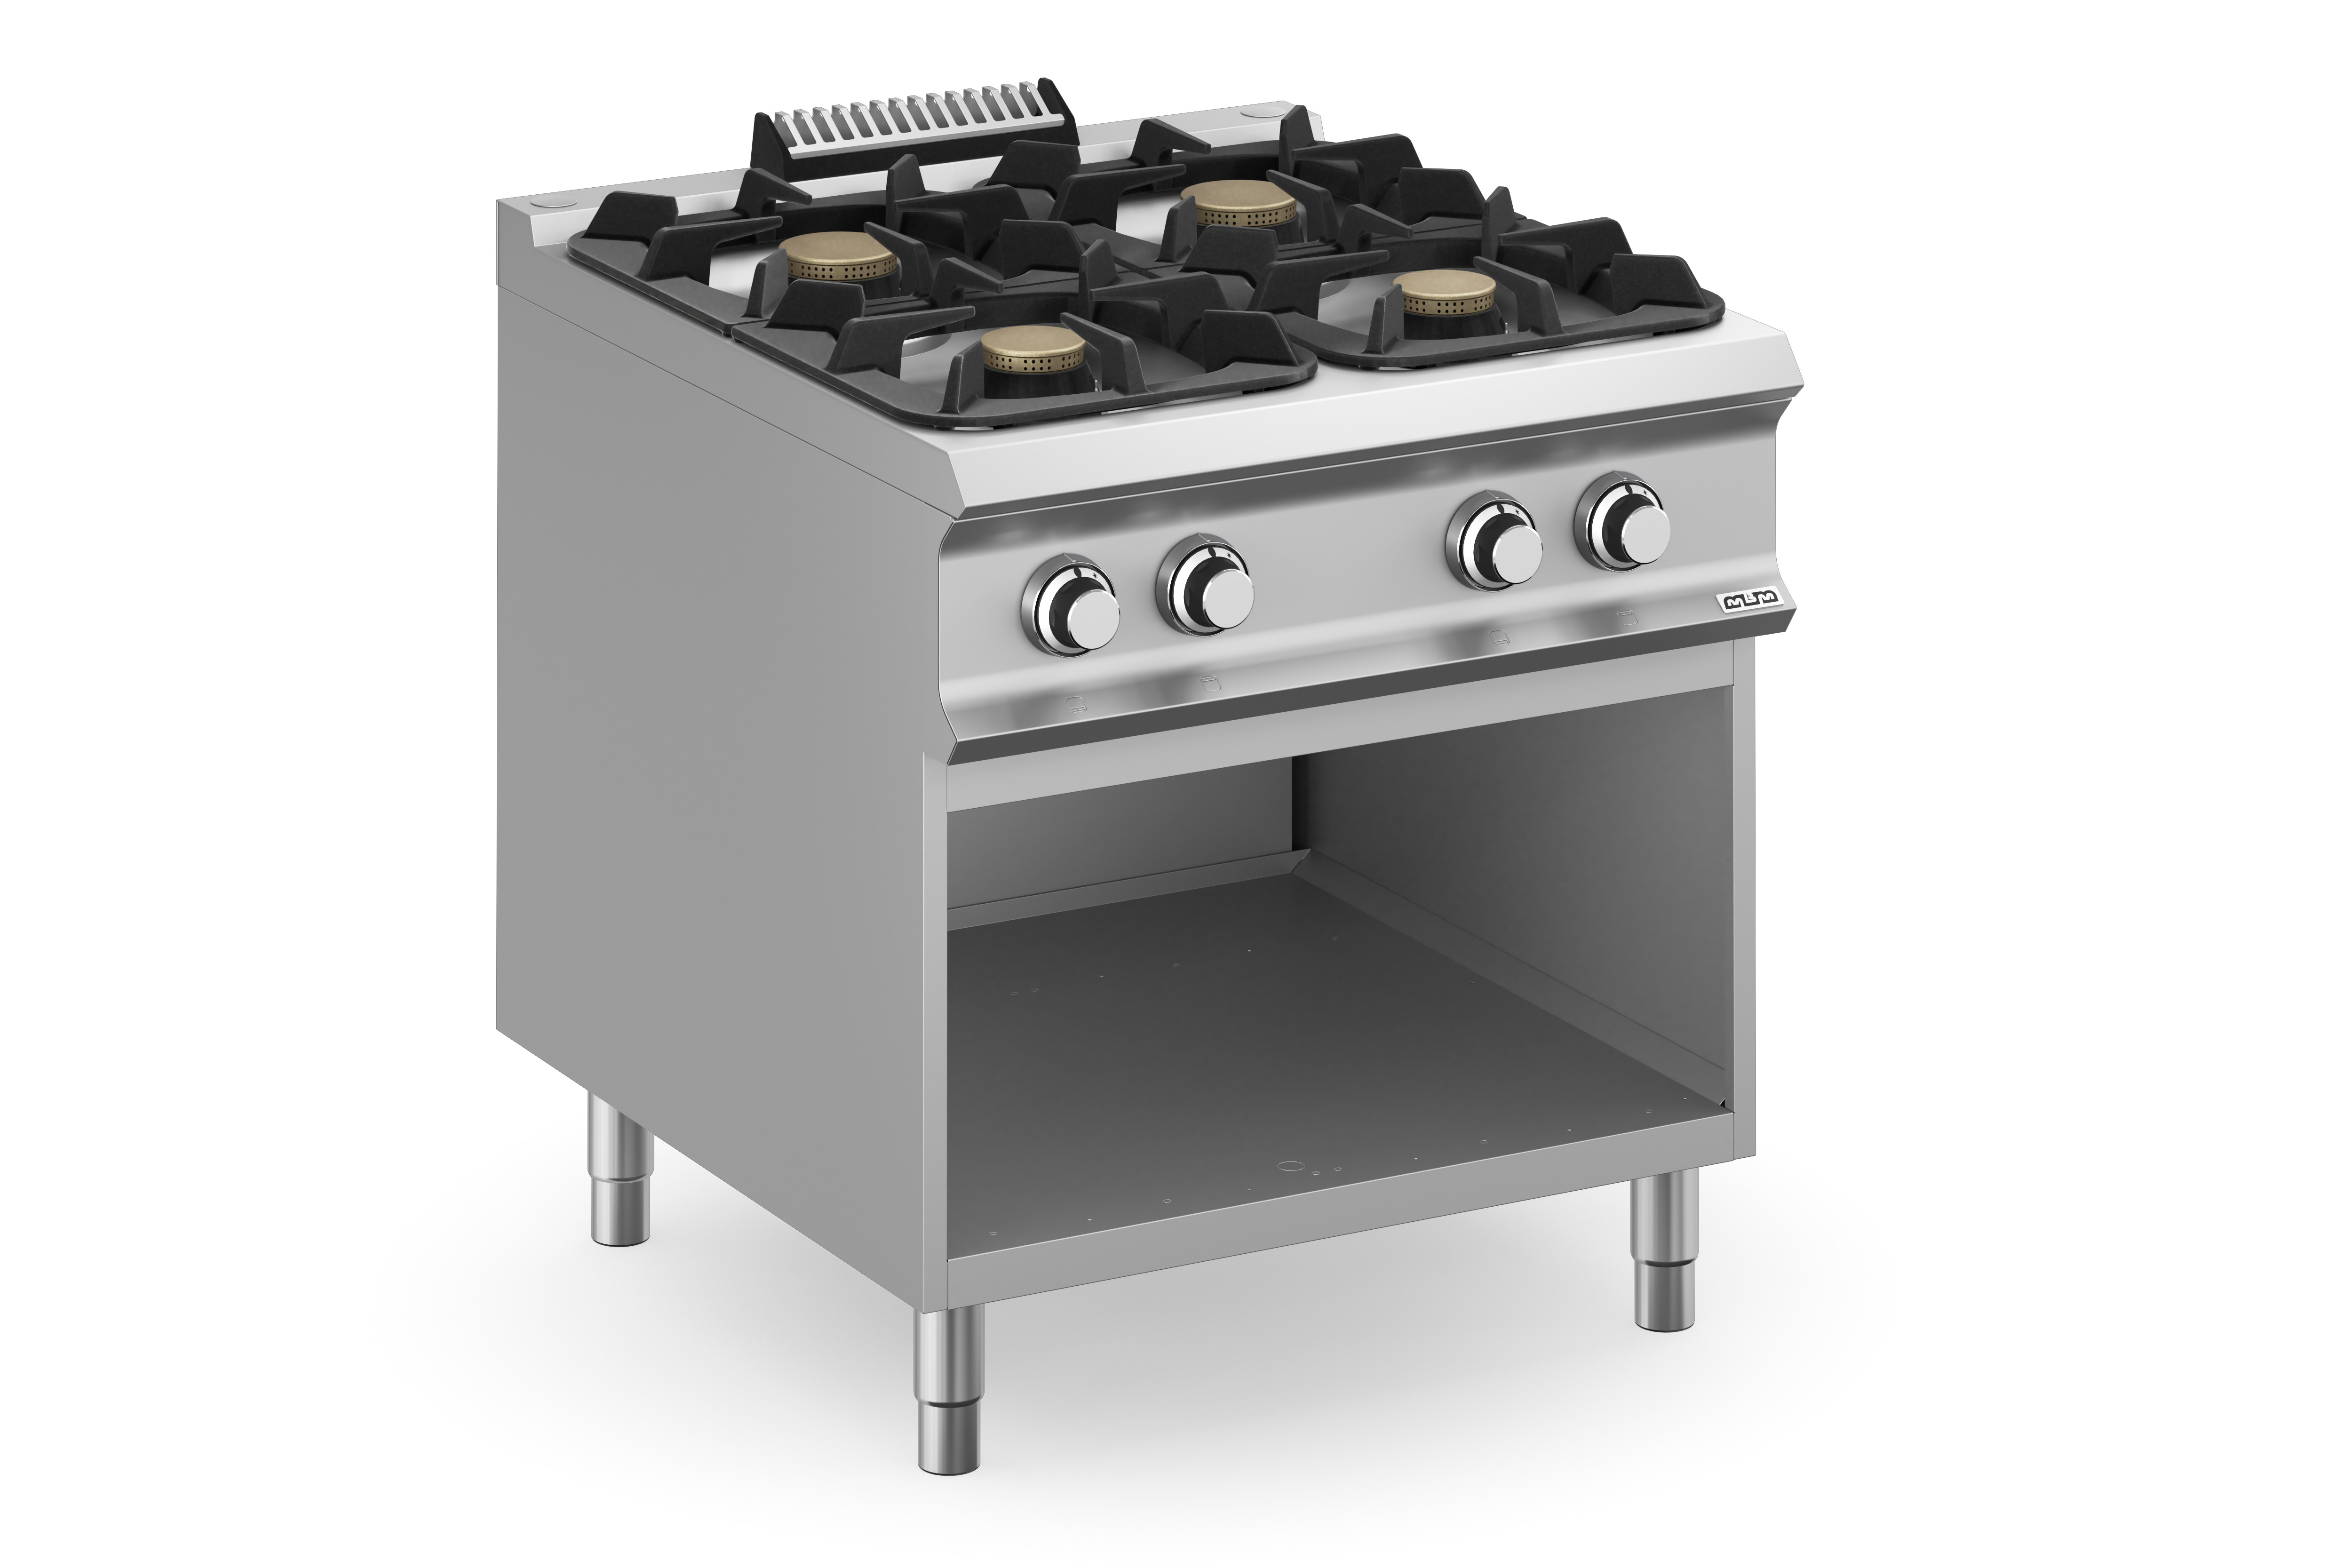 Domina Pro 900 FB98AXL 4 Burners Freestanding with Open Stand Gas Cooker